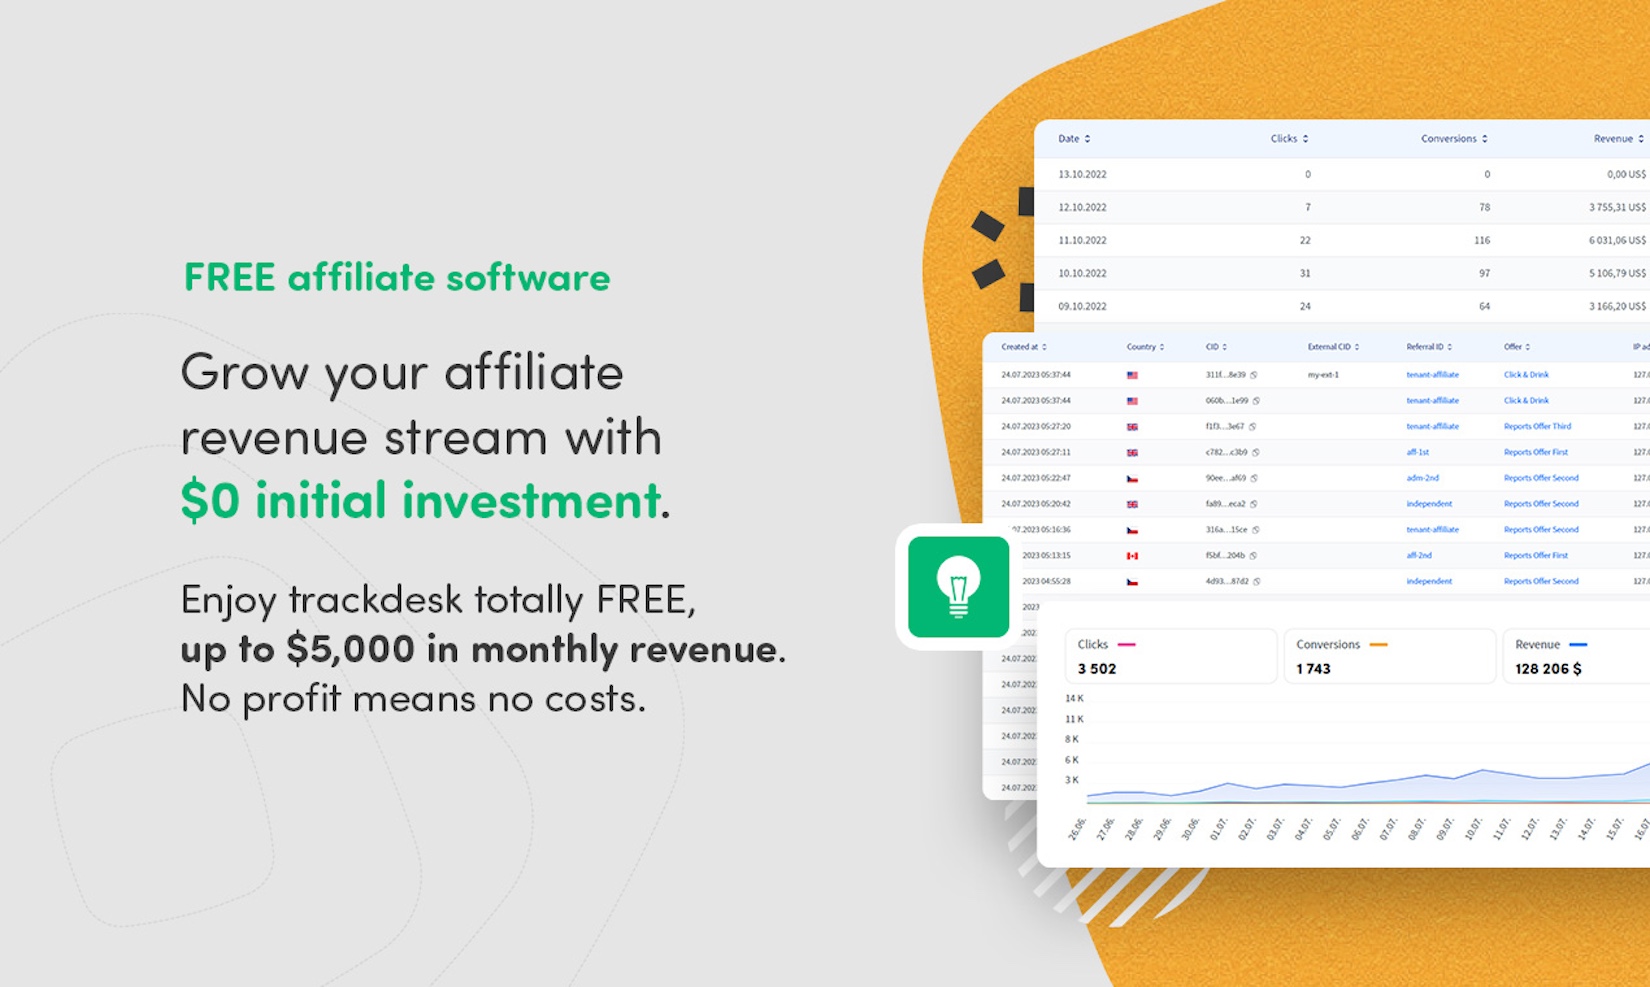 Trackdesk Grow your affiliate revenue stream with $0 initial investment.